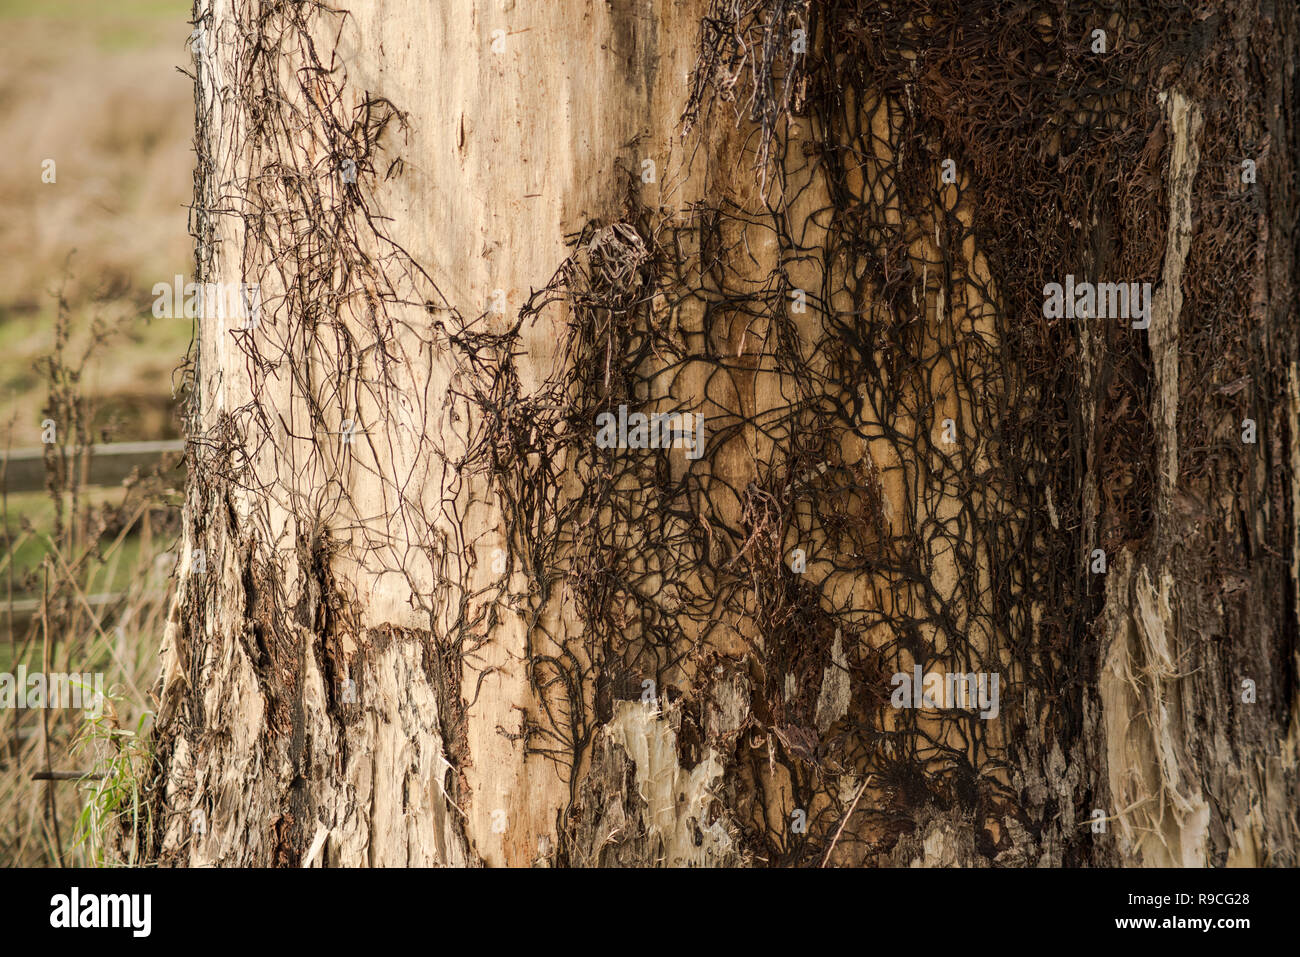 Honey Fungus spreading mat over standing dead tree (willow). Stock Photo